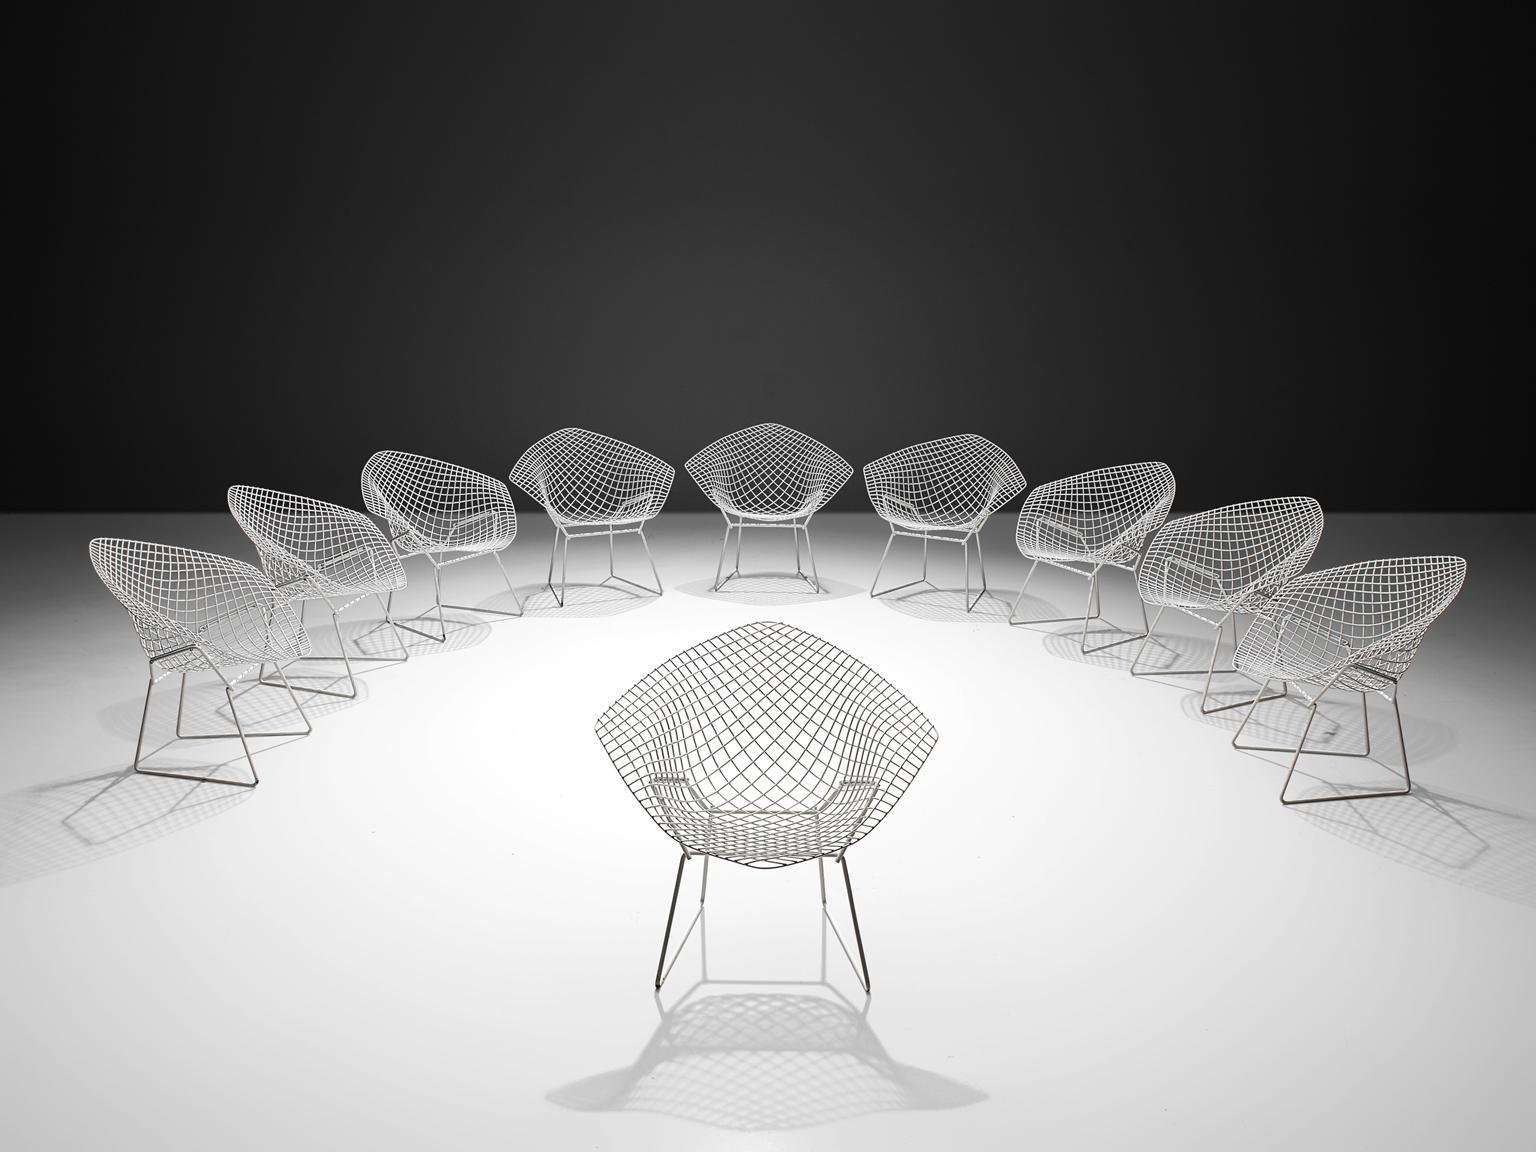 Harry Bertoia for Knoll, 'Diamond' chairs, white coated metal, United States, 1950s (later production)

The Diamond Chair is, according to Knoll, an astounding study in space, form and function by one of the master sculptors of the last century.